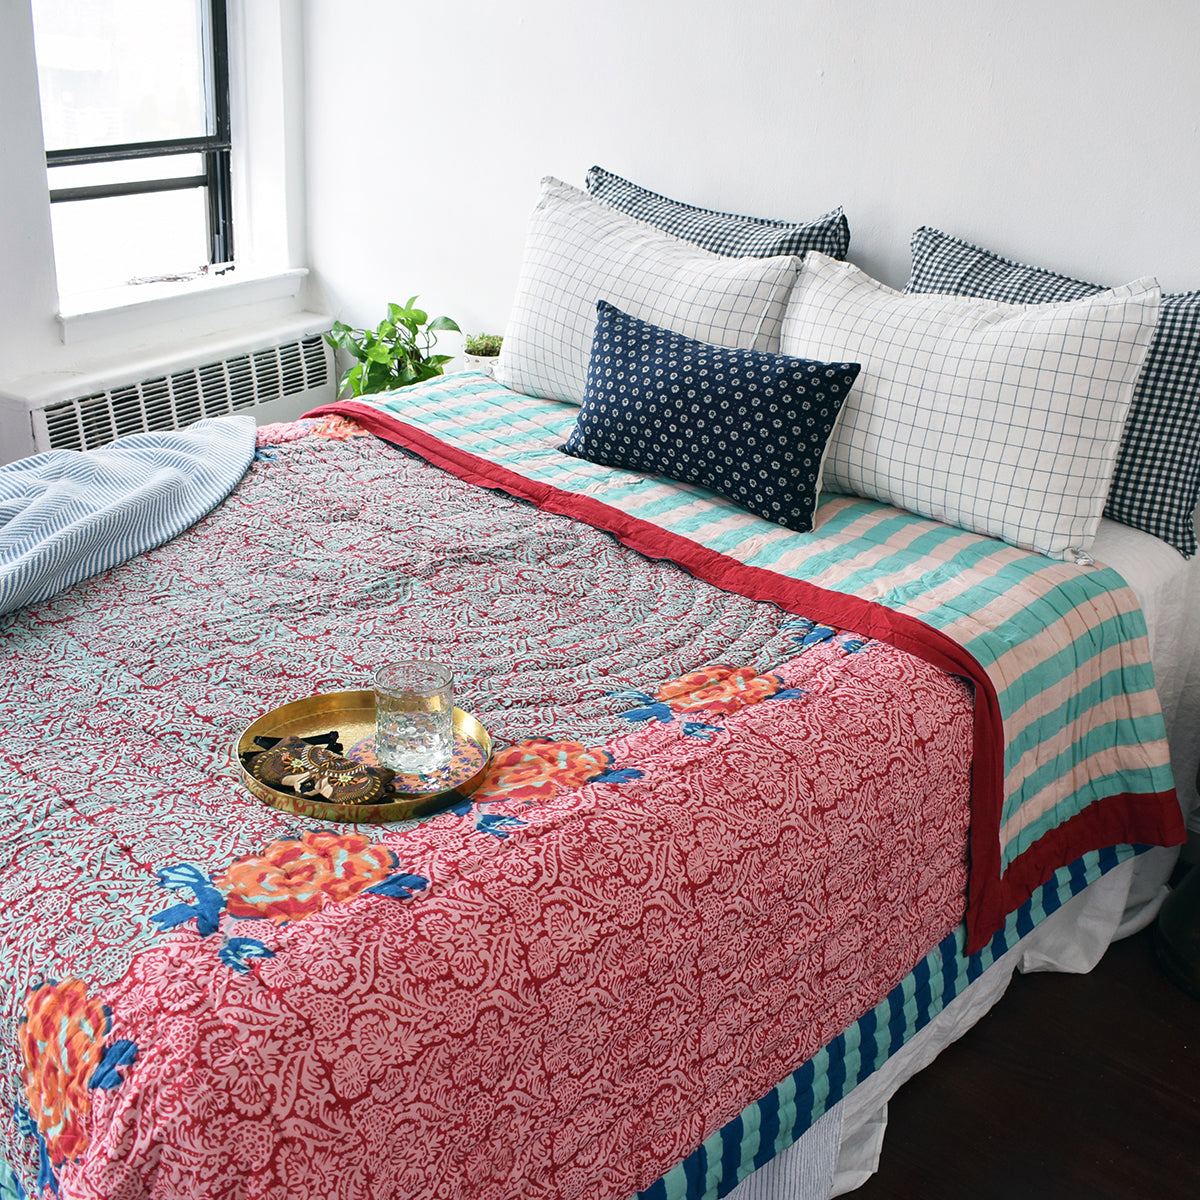 Linge Particulier Navy Check Standard Linen Pillowcase Sham with a Lisa Corti quilt for a colorful linen bedding look in blue check - Collyer&#39;s Mansion